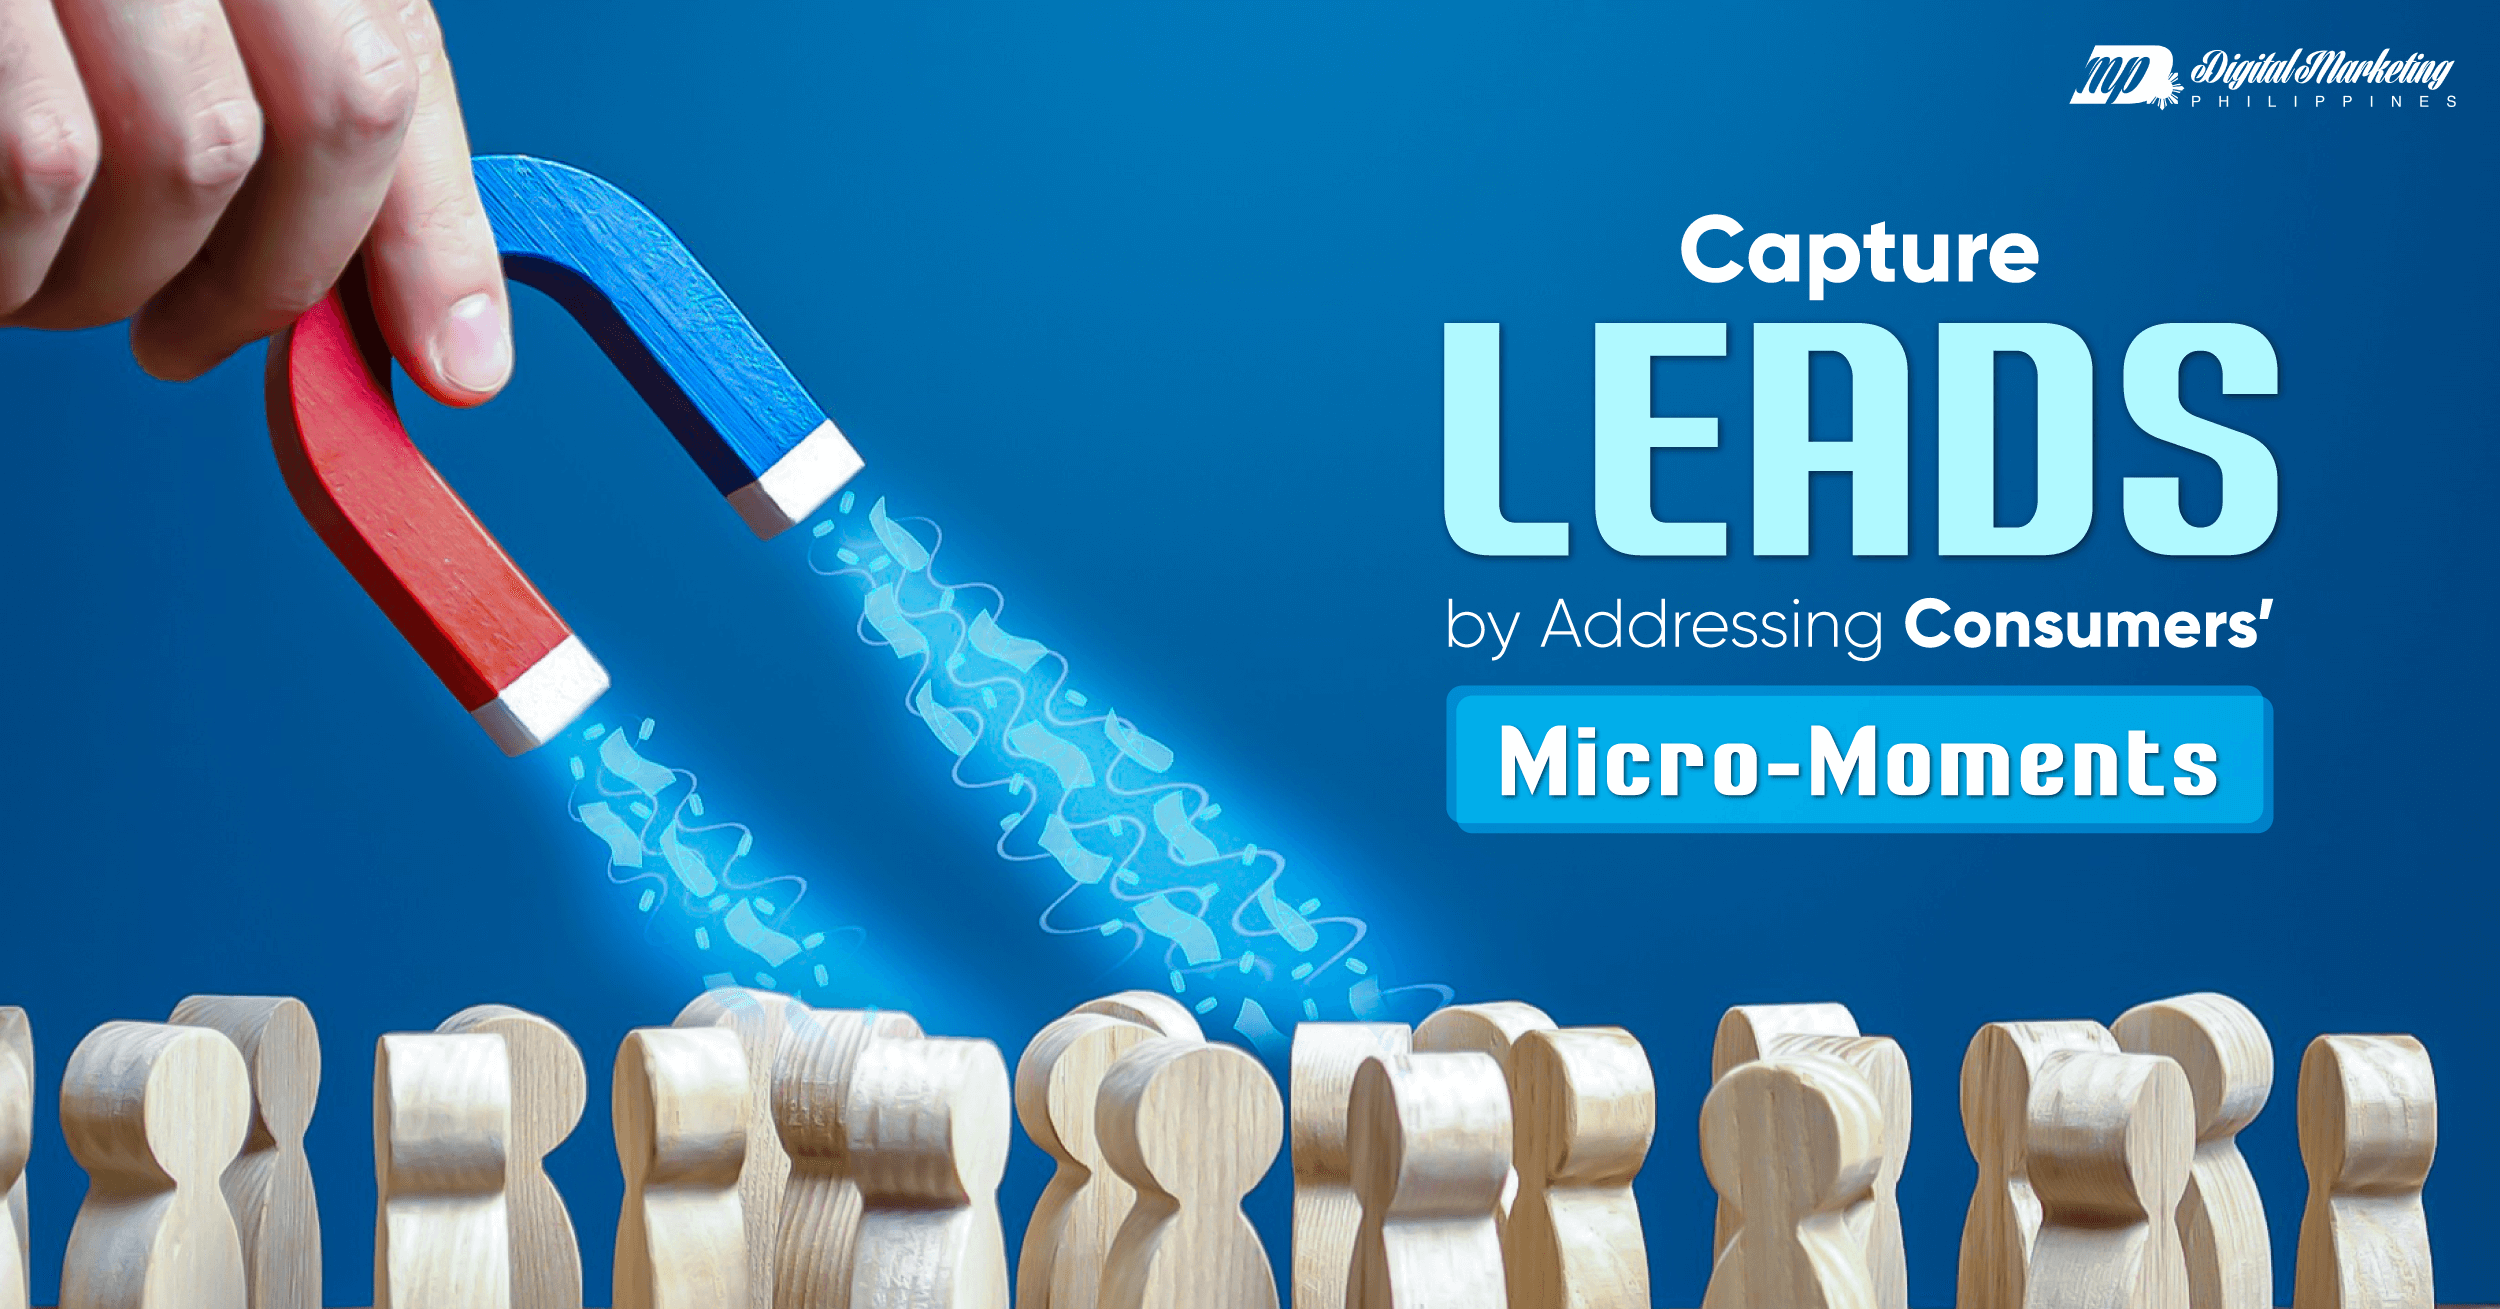 Capture Leads by Addressing Consumers’ Micro-Moments featured image